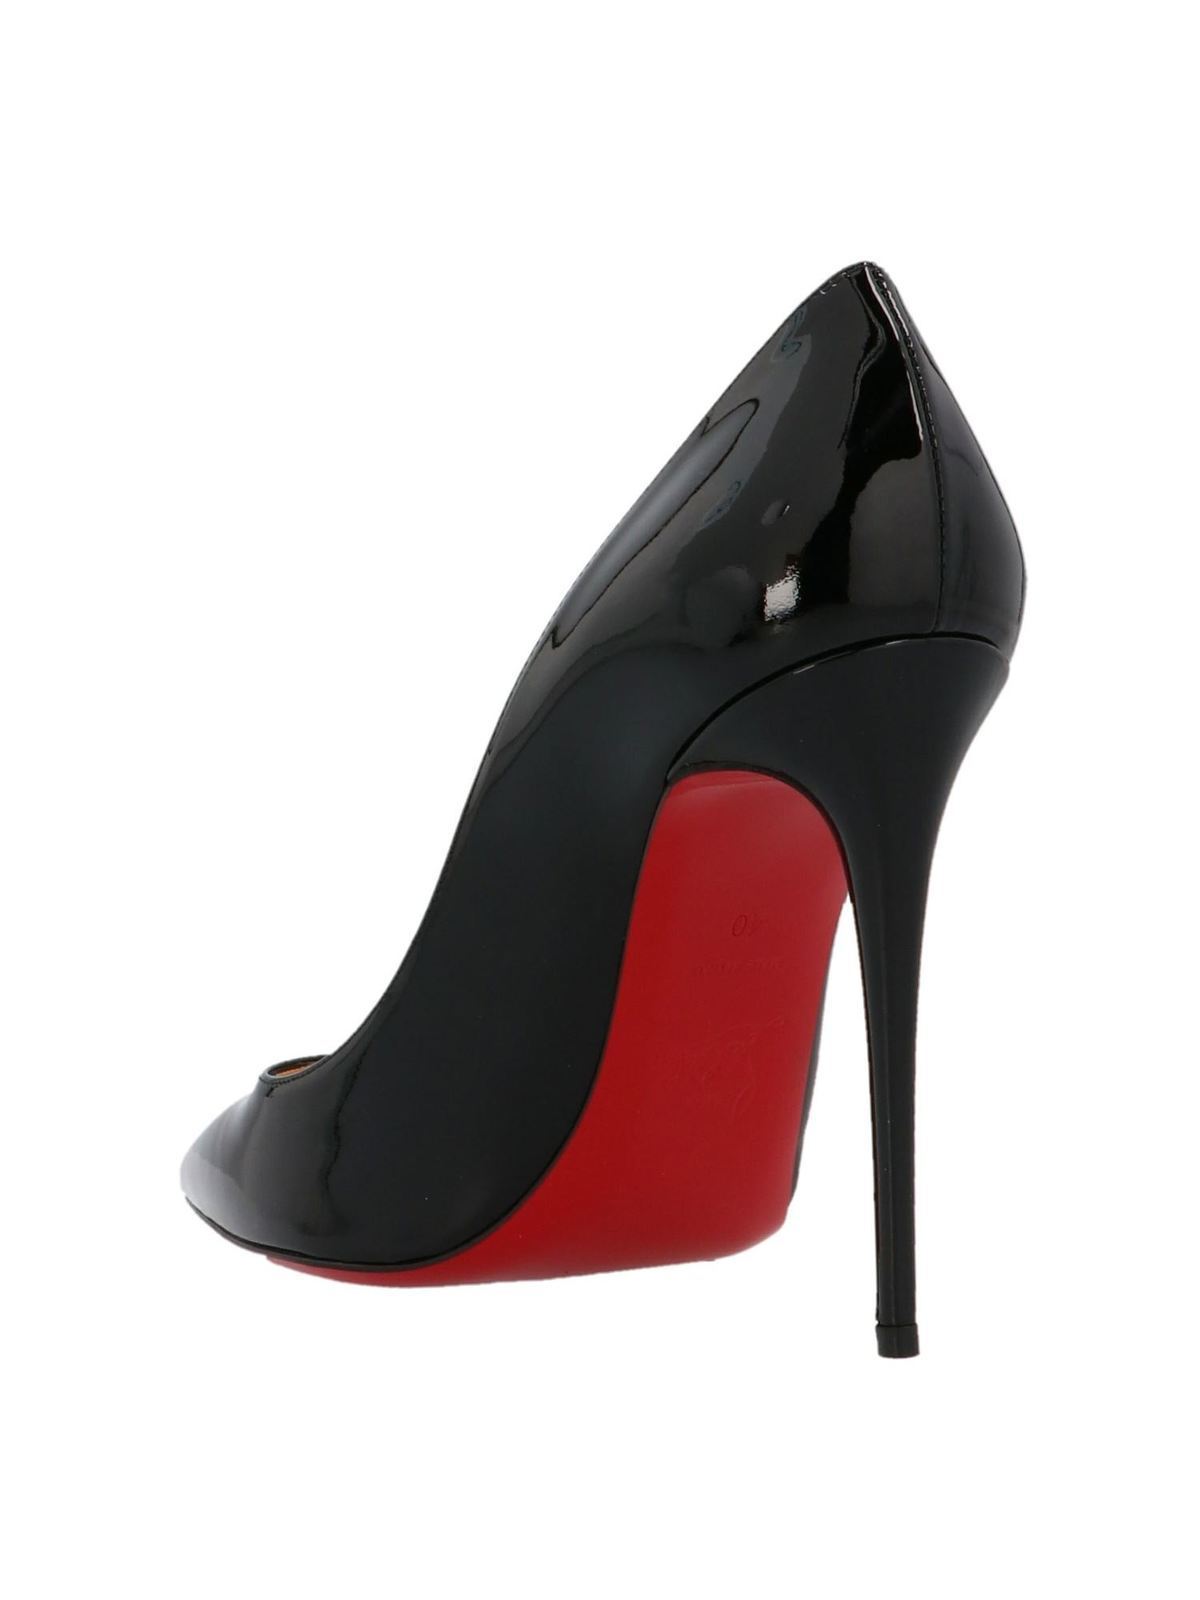 Forkorte Blot Labe Court shoes Christian Louboutin - Kate 10 pumps in black patent leather -  3191411BK01